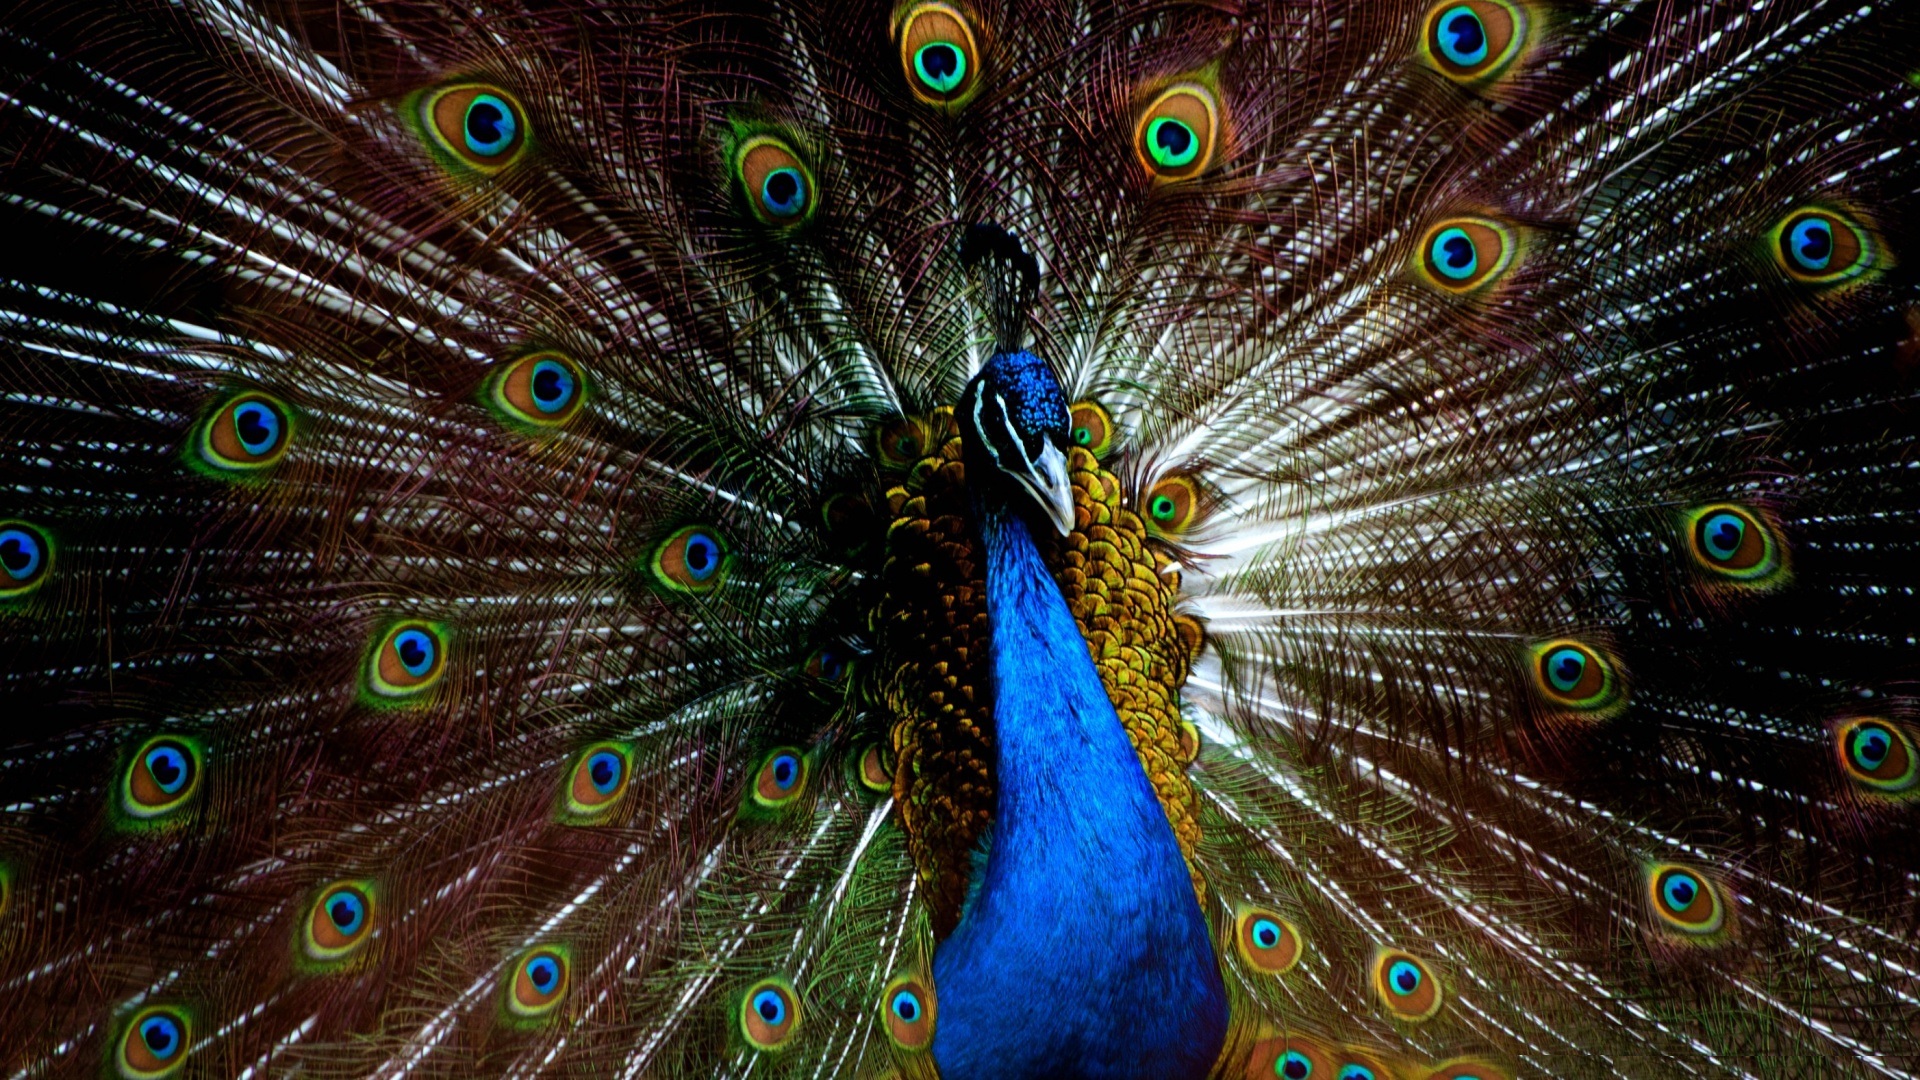 Peacock Feathers Wallpaper 61 images